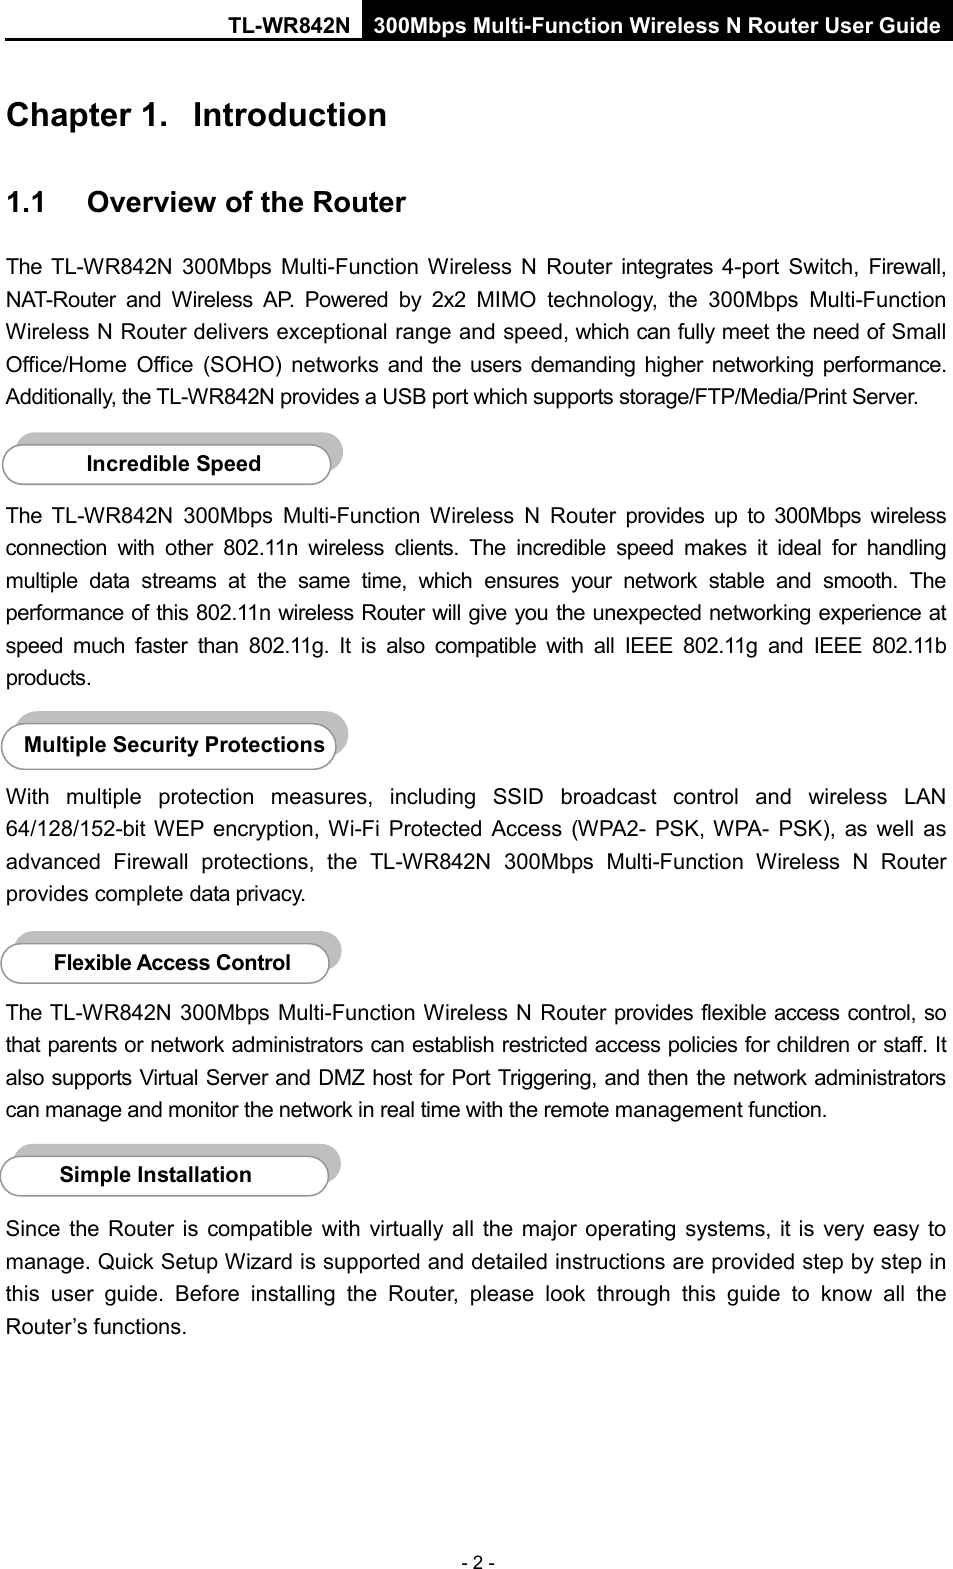 TL-WR842N 300Mbps Multi-Function Wireless N Router User Guide  - 2 - Chapter 1.  Introduction 1.1  Overview of the Router The TL-WR842N 300Mbps Multi-Function Wireless N Router integrates  4-port Switch, Firewall, NAT-Router and Wireless AP. Powered by  2x2  MIMO technology,  the 300Mbps Multi-Function Wireless N Router delivers exceptional range and speed, which can fully meet the need of Small Office/Home Office (SOHO) networks and the users demanding higher networking performance. Additionally, the TL-WR842N provides a USB port which supports storage/FTP/Media/Print Server.  The  TL-WR842N 300Mbps Multi-Function Wireless N Router provides up to 300Mbps wireless connection with other 802.11n wireless clients. The incredible speed makes it ideal for handling multiple data streams at the same time, which ensures your network stable and smooth. The performance of this 802.11n wireless Router will give you the unexpected networking experience at speed much faster than 802.11g.  It is also  compatible with all IEEE 802.11g and IEEE 802.11b products.  With multiple protection measures, including SSID broadcast control and wireless LAN 64/128/152-bit WEP encryption,  Wi-Fi Protected Access (WPA2- PSK, WPA-  PSK), as well as advanced Firewall protections, the TL-WR842N 300Mbps Multi-Function Wireless N Router provides complete data privacy.    The TL-WR842N 300Mbps Multi-Function Wireless N Router provides flexible access control, so that parents or network administrators can establish restricted access policies for children or staff. It also supports Virtual Server and DMZ host for Port Triggering, and then the network administrators can manage and monitor the network in real time with the remote management function.    Since the Router is compatible with virtually all the major operating systems, it  is  very  easy to manage. Quick Setup Wizard is supported and detailed instructions are provided step by step in this user guide. Before installing the Router, please look through this guide to know all the Router’s functions.   Simple Installation Flexible Access Control  Multiple Security Protections Incredible Speed  